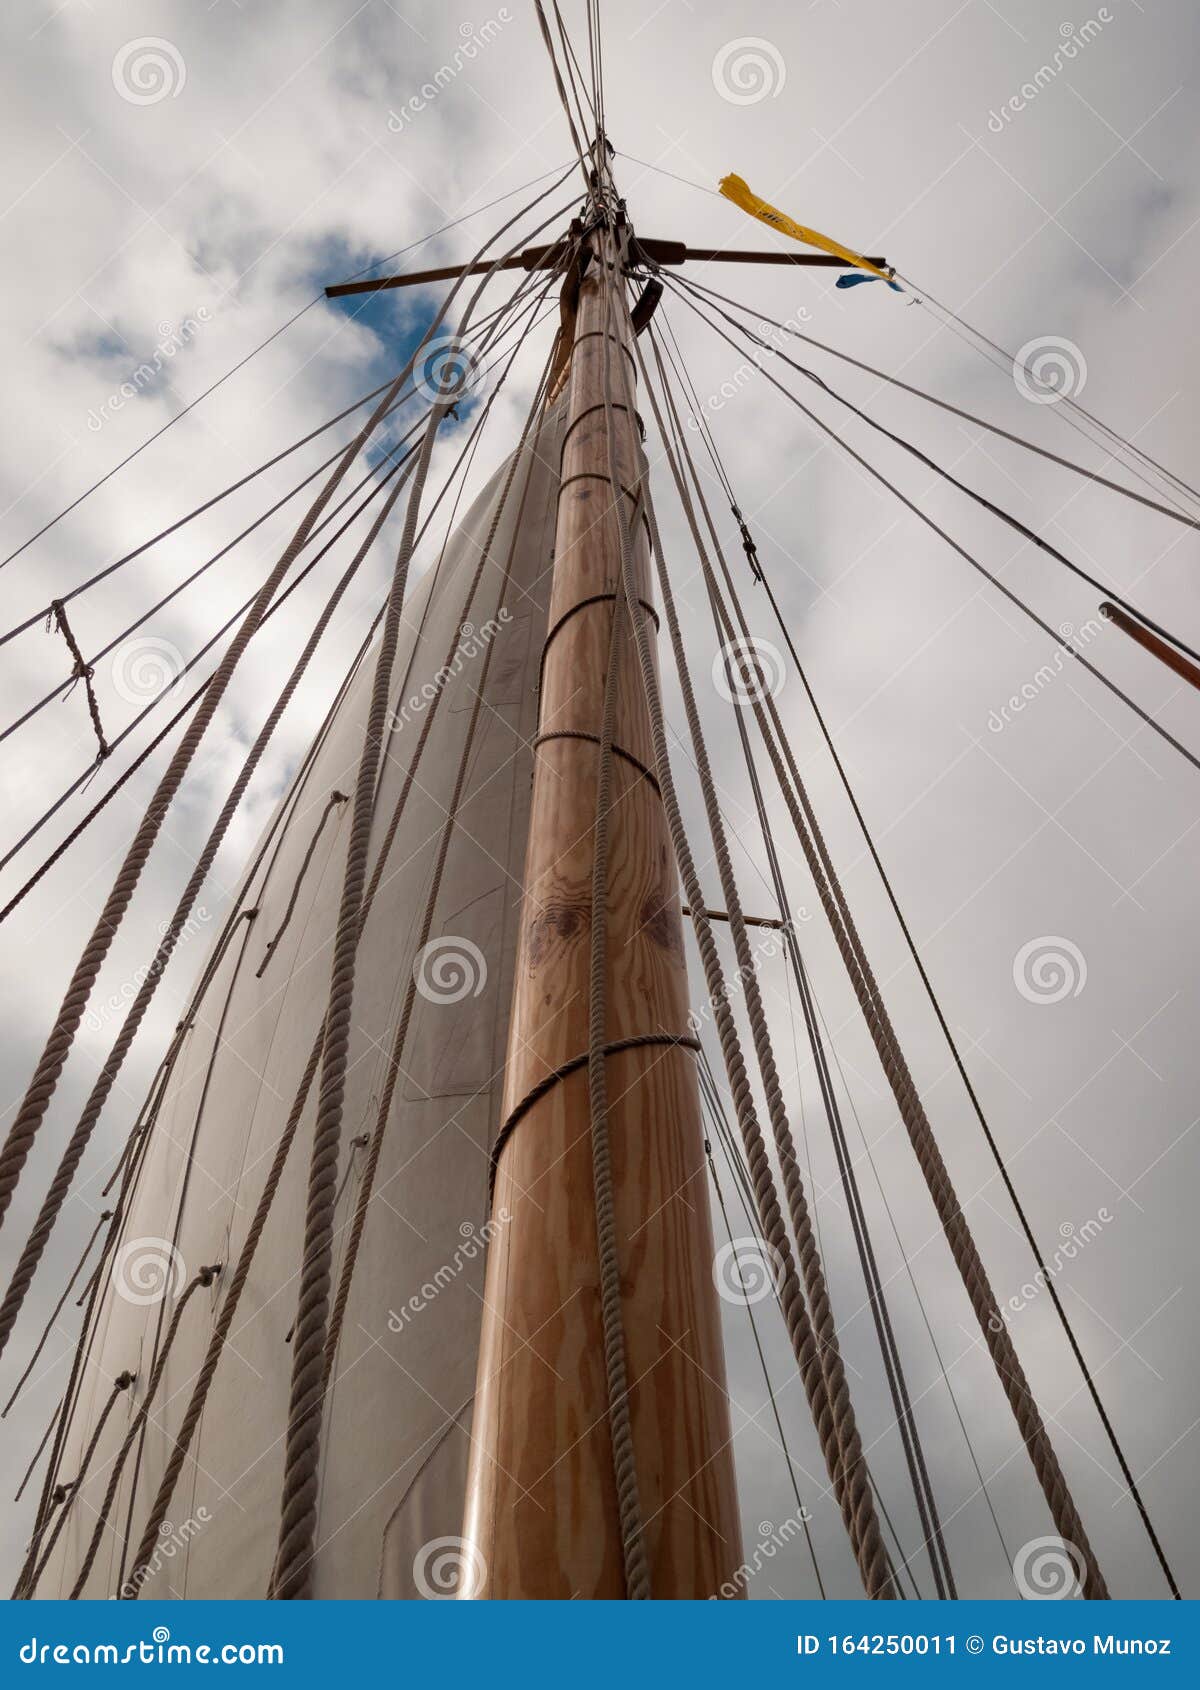 mast, ropes and sails collected from an old sailboat seen from below